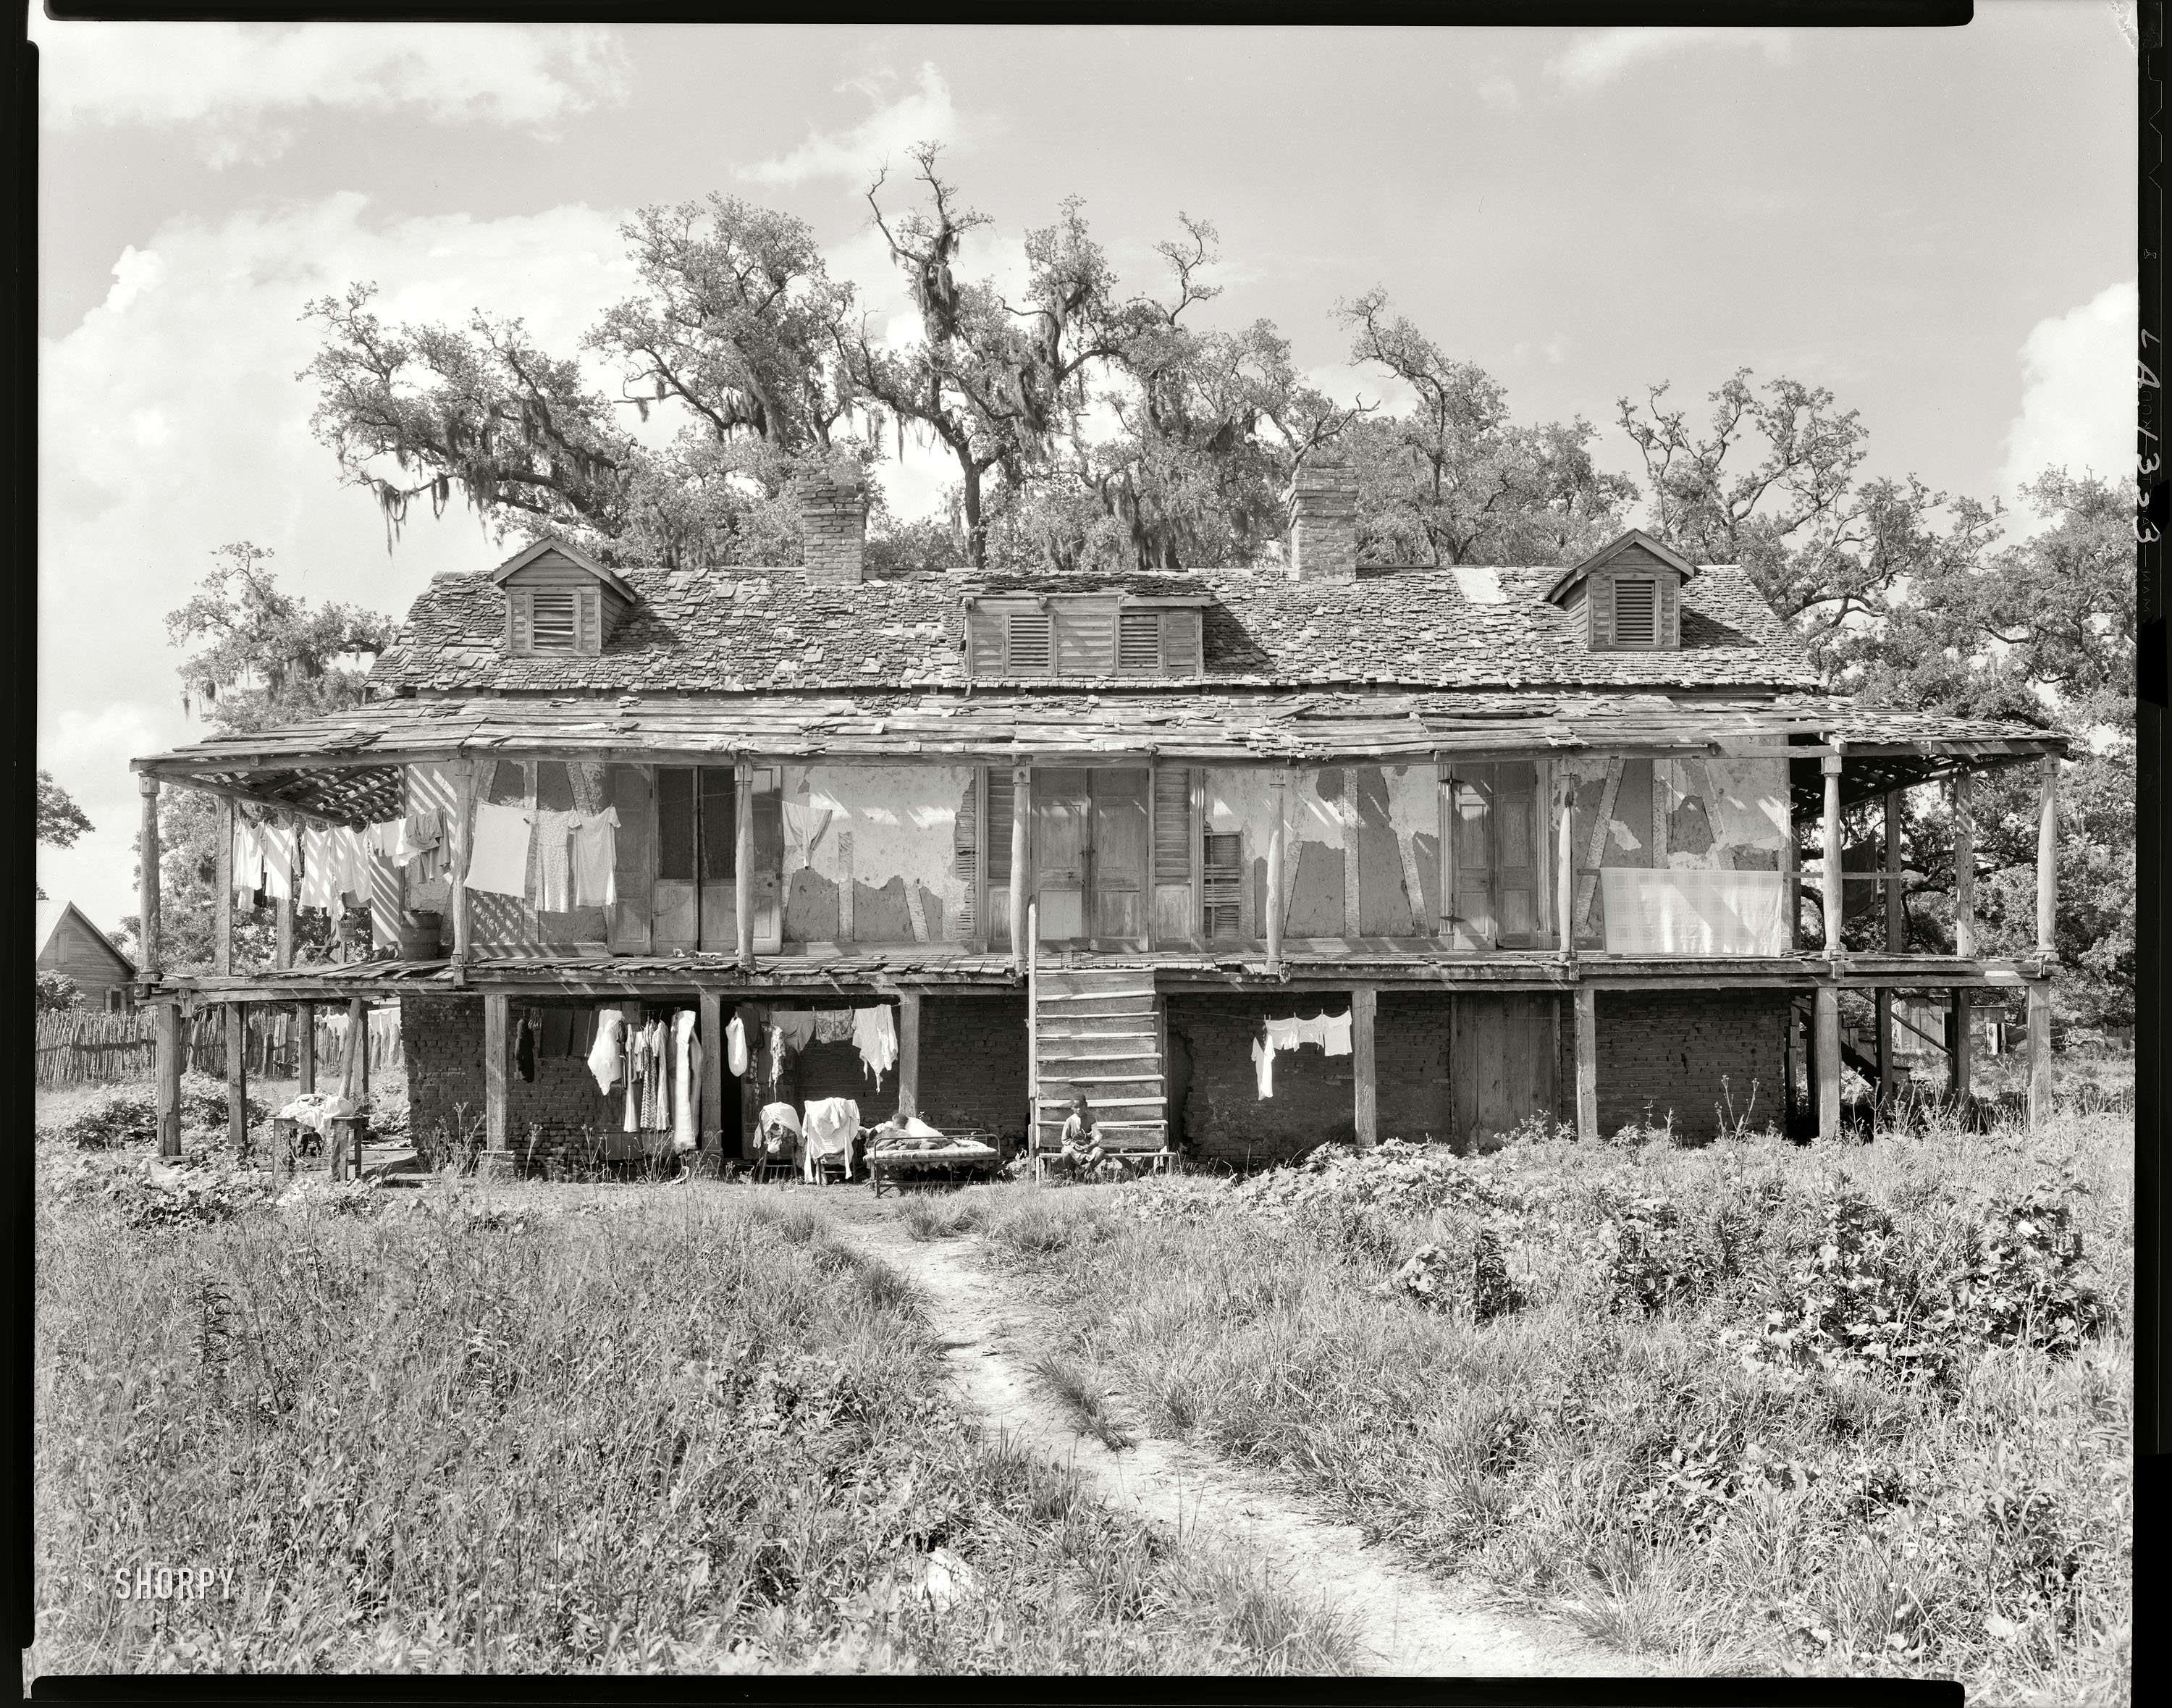 1938. St. Charles Parish, Louisiana. "The Rookery, Trepagnier House. Norco vicinity. Abandoned plantation house now occupied by Negroes." 8x10 inch acetate negative by Frances Benjamin Johnston. View full size.